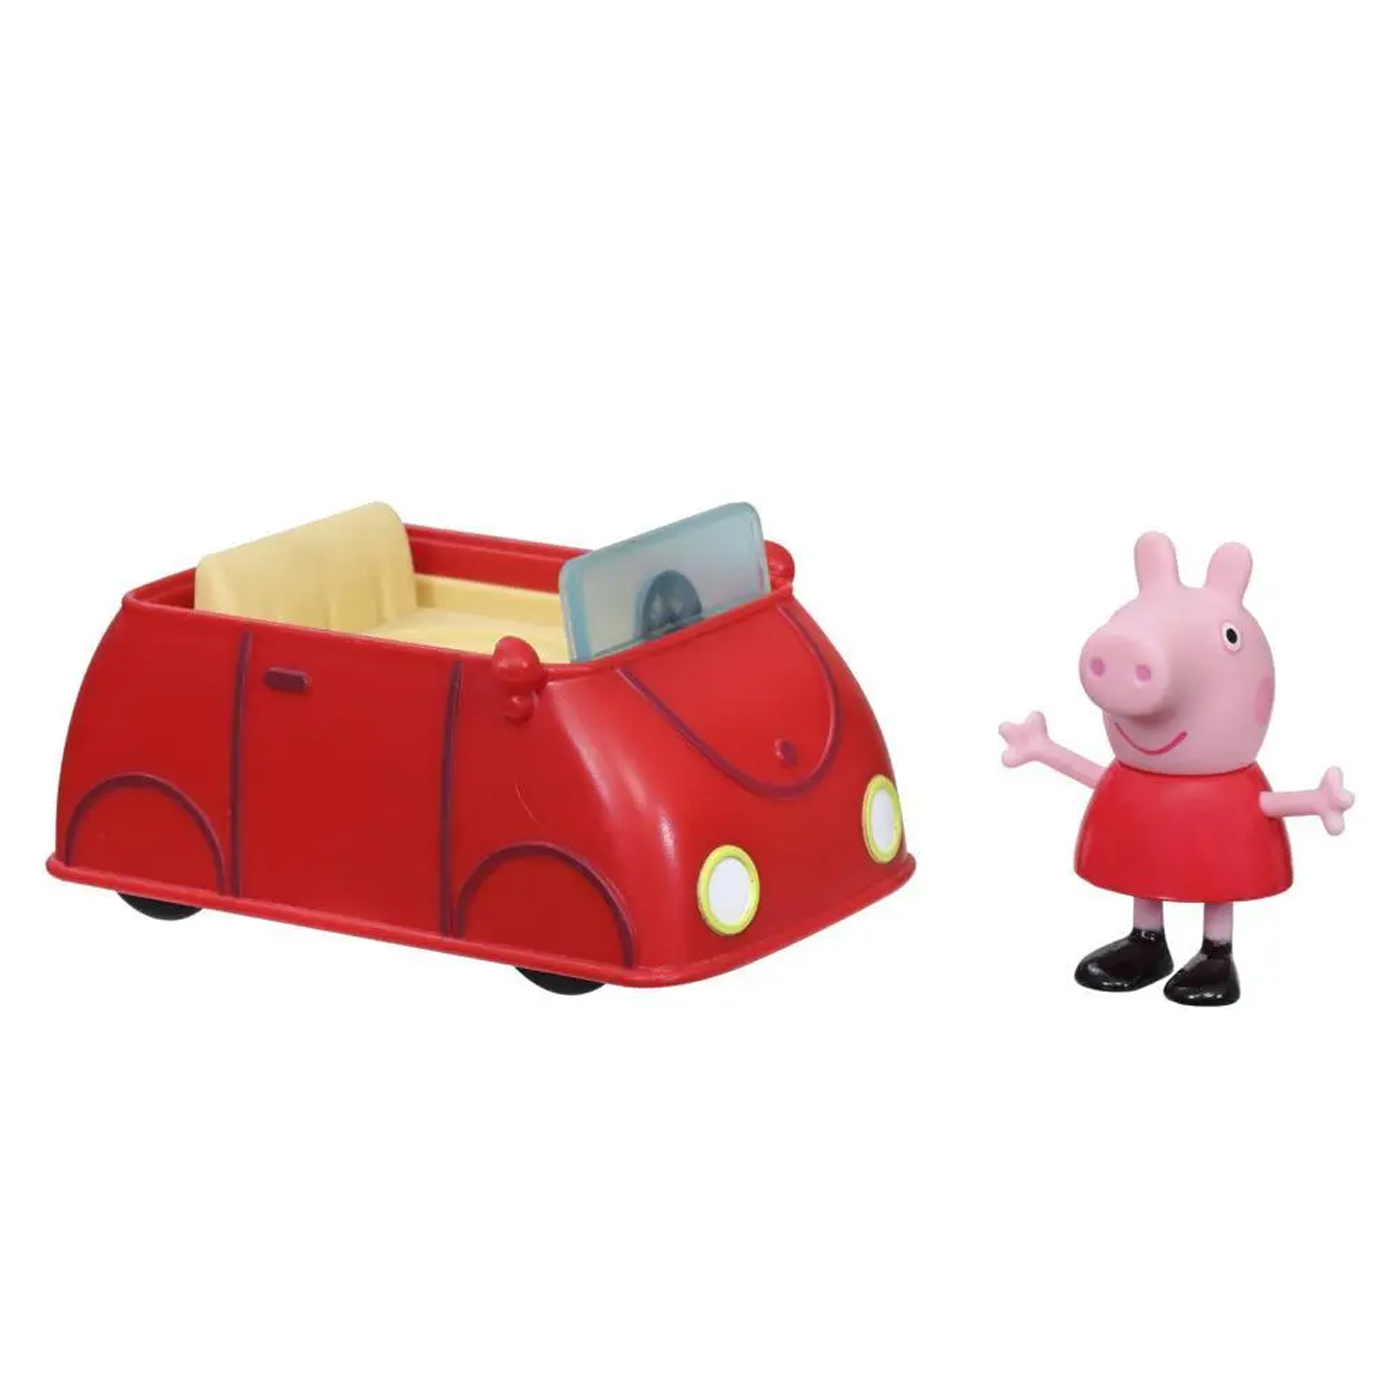 HASBRO GAMES Peppa Pig Little Red Car